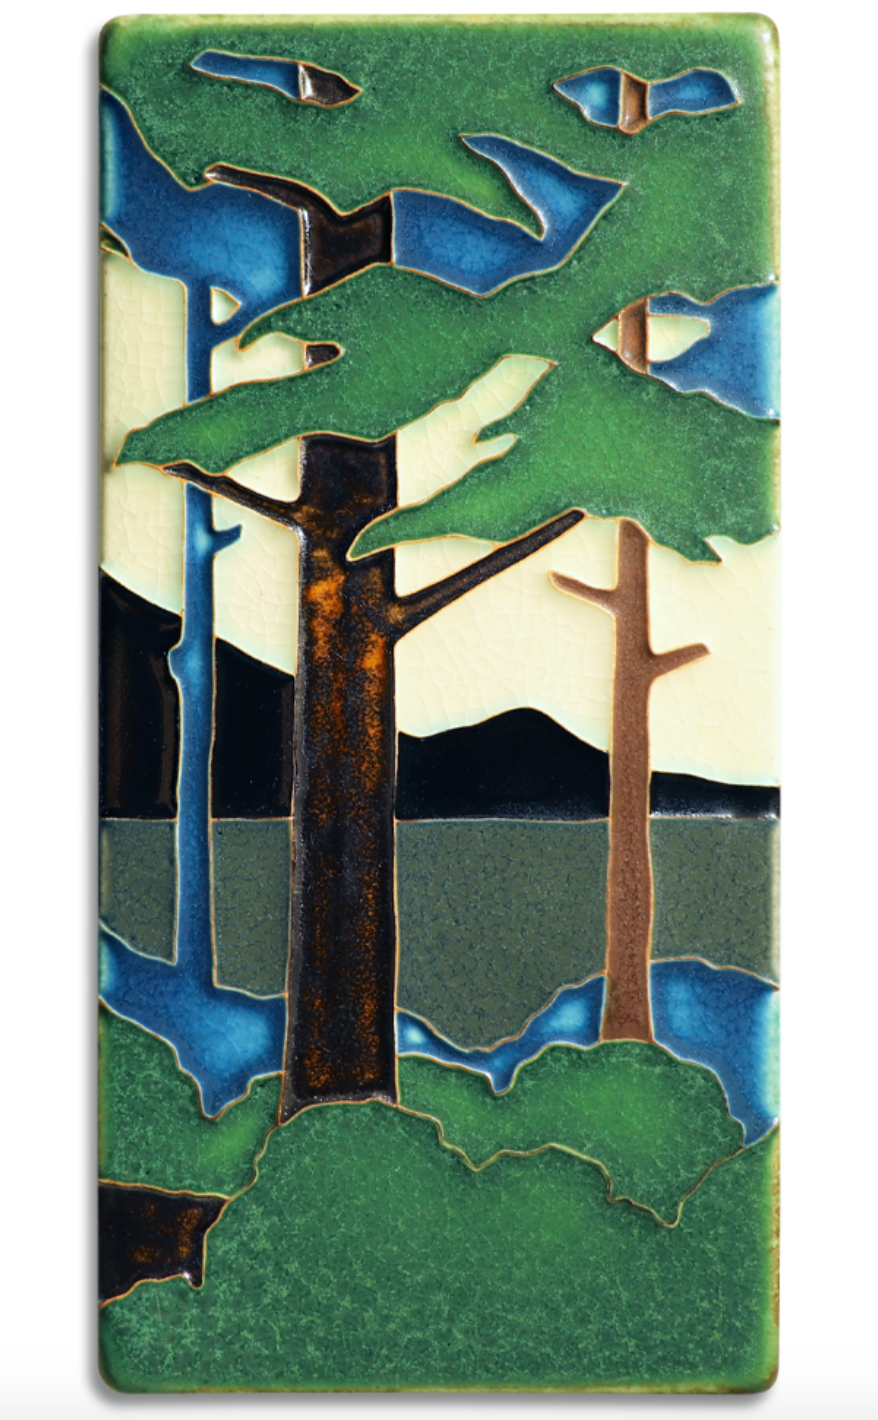 Motawi's Pine Landscape series is adapted from Grueby Faience designer Addison LeBoutillier's tile "Pines." This tile was Motawi's first attempt at polychrome work and is most recognized as a Motawi signature series.